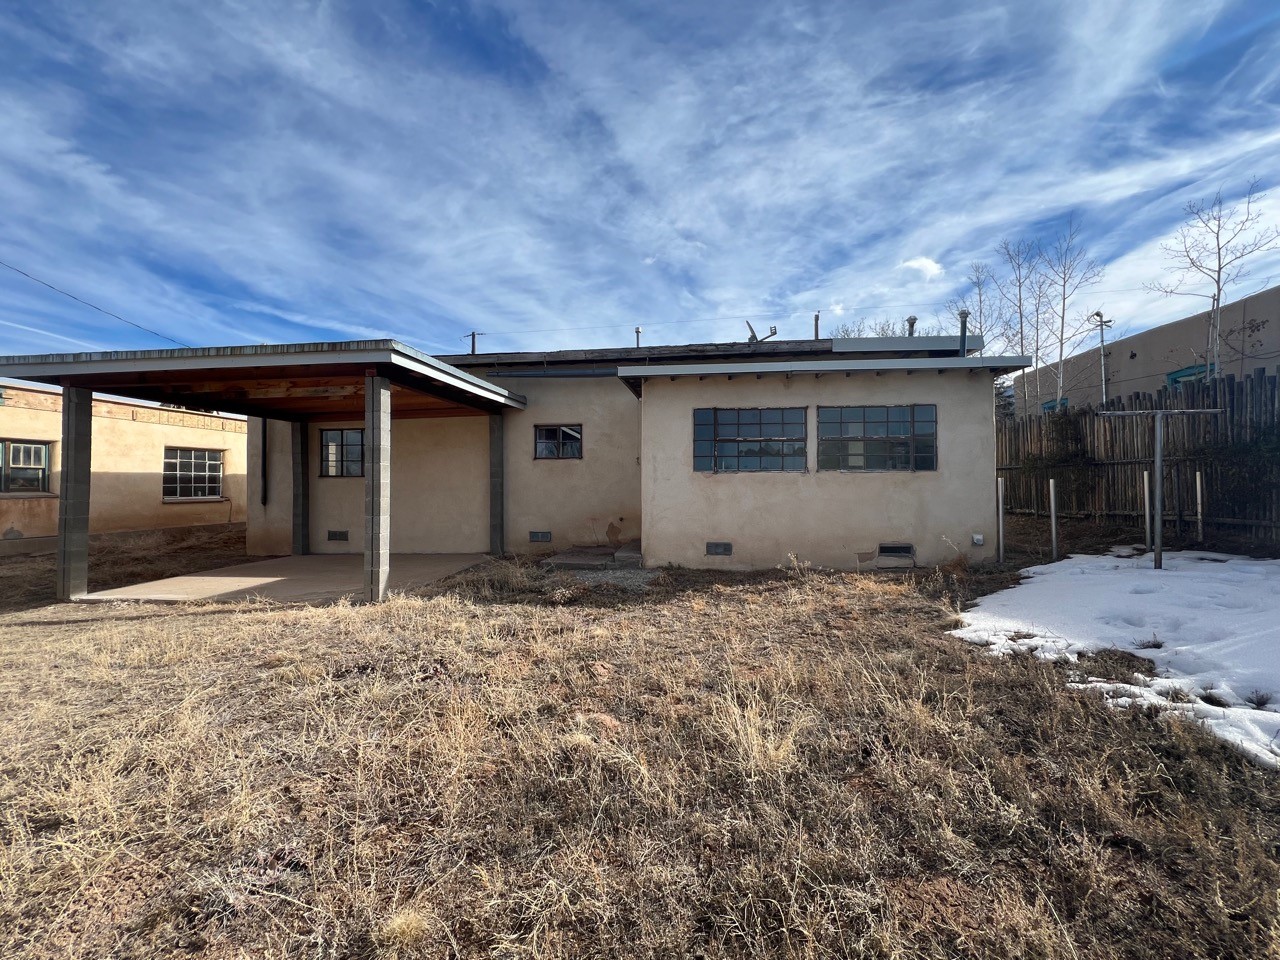 406 Apodaca Hill Street, Santa Fe, New Mexico 87501, 3 Bedrooms Bedrooms, ,1 BathroomBathrooms,Residential,For Sale,406 Apodaca Hill Street,202400405